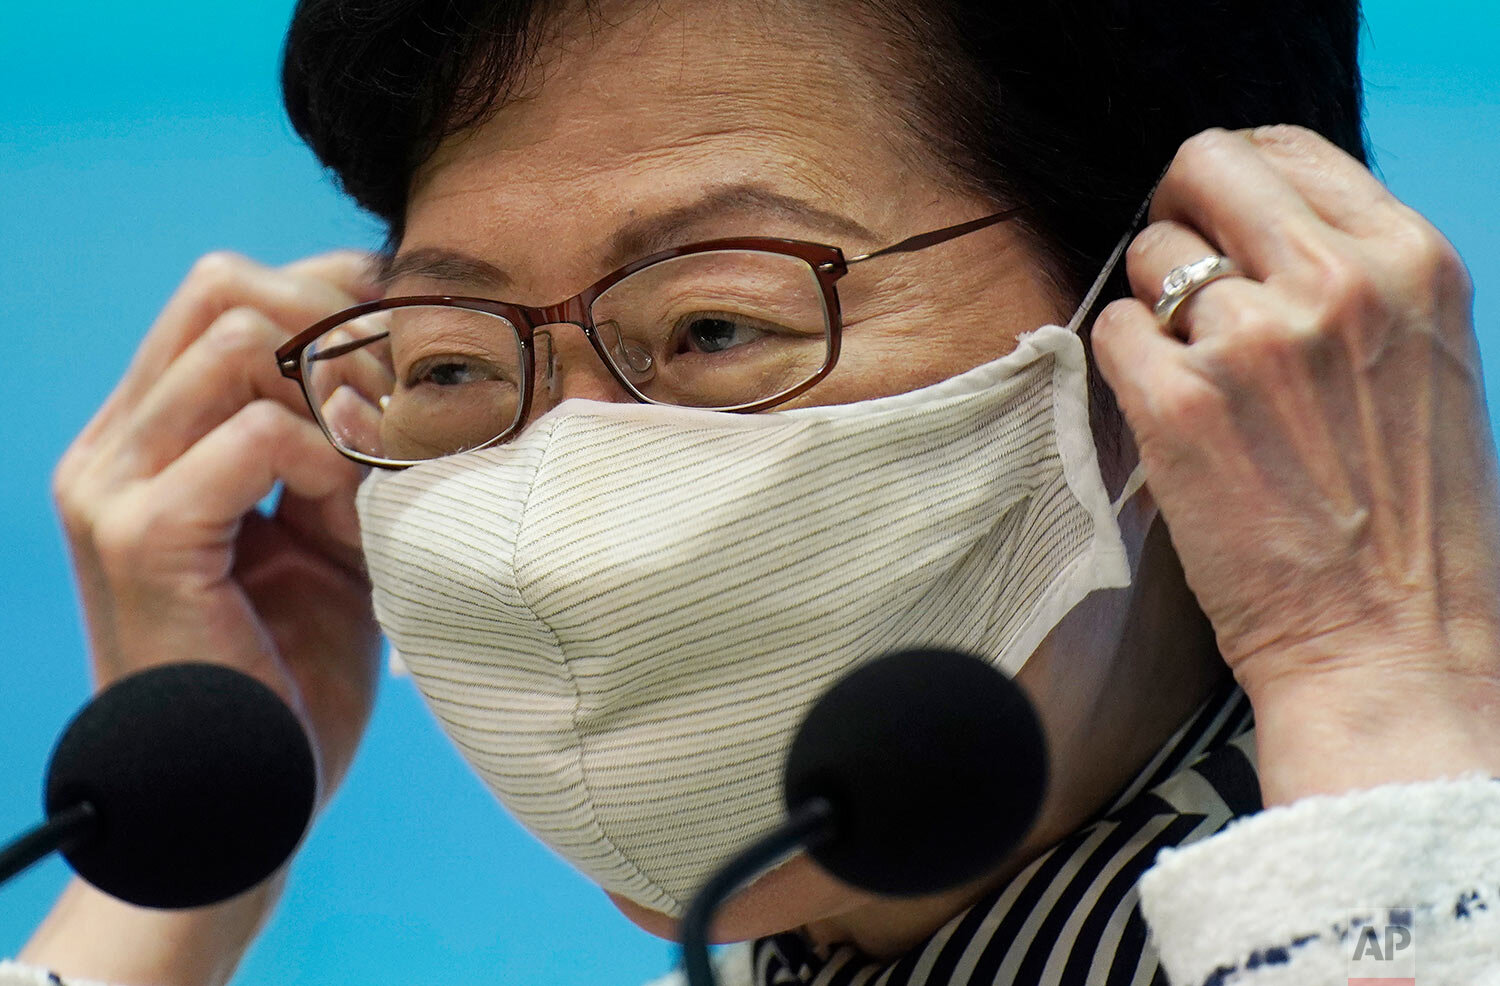  Hong Kong Chief Executive Carrie Lam adjusts her face mask during a press conference on the state of the coronavirus in Hong Kong, Tuesday, Sept. 1, 2020.  (AP Photo/Vincent Yu) 